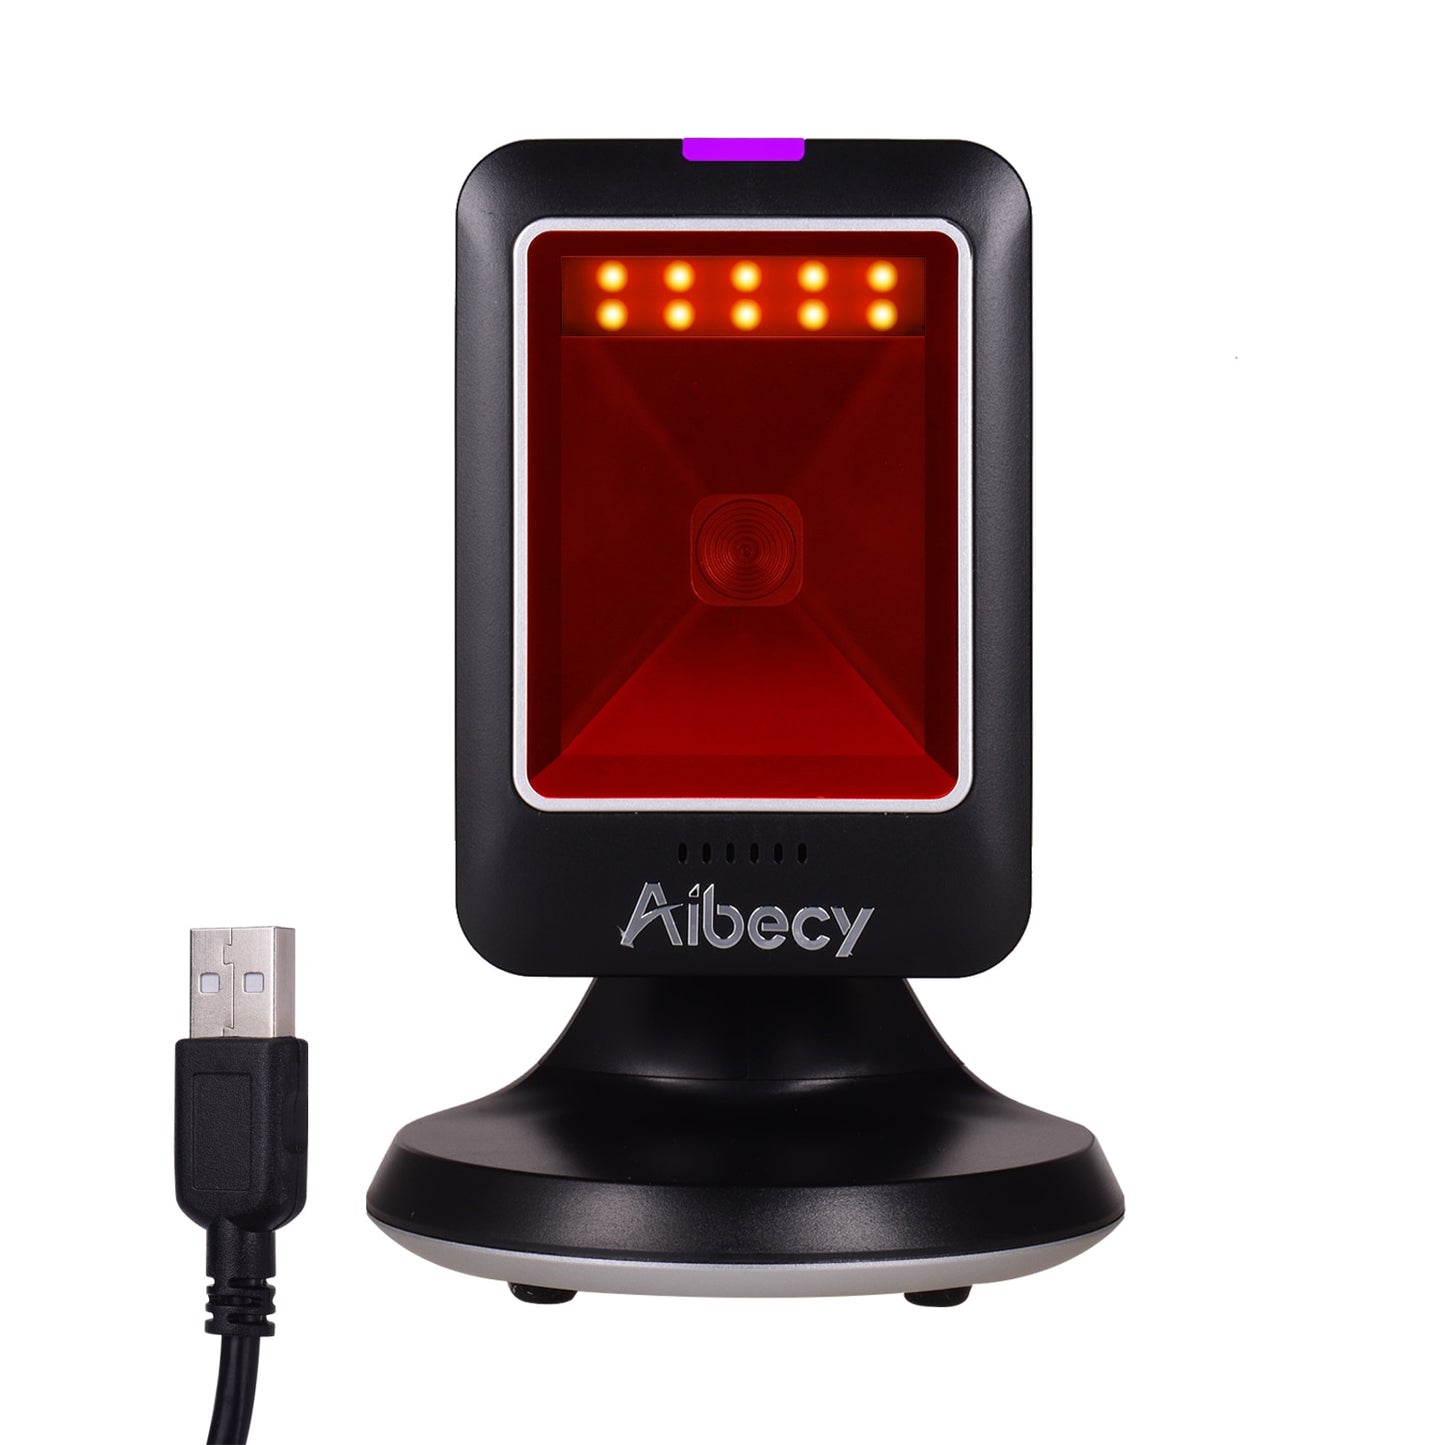 Aibecy MP6300Y 1D/2D/QR Omnidirectional Barcode Scanner USB Wired Bar Code Reader CMOS Hand-Free QR Code Scanner for  Retail